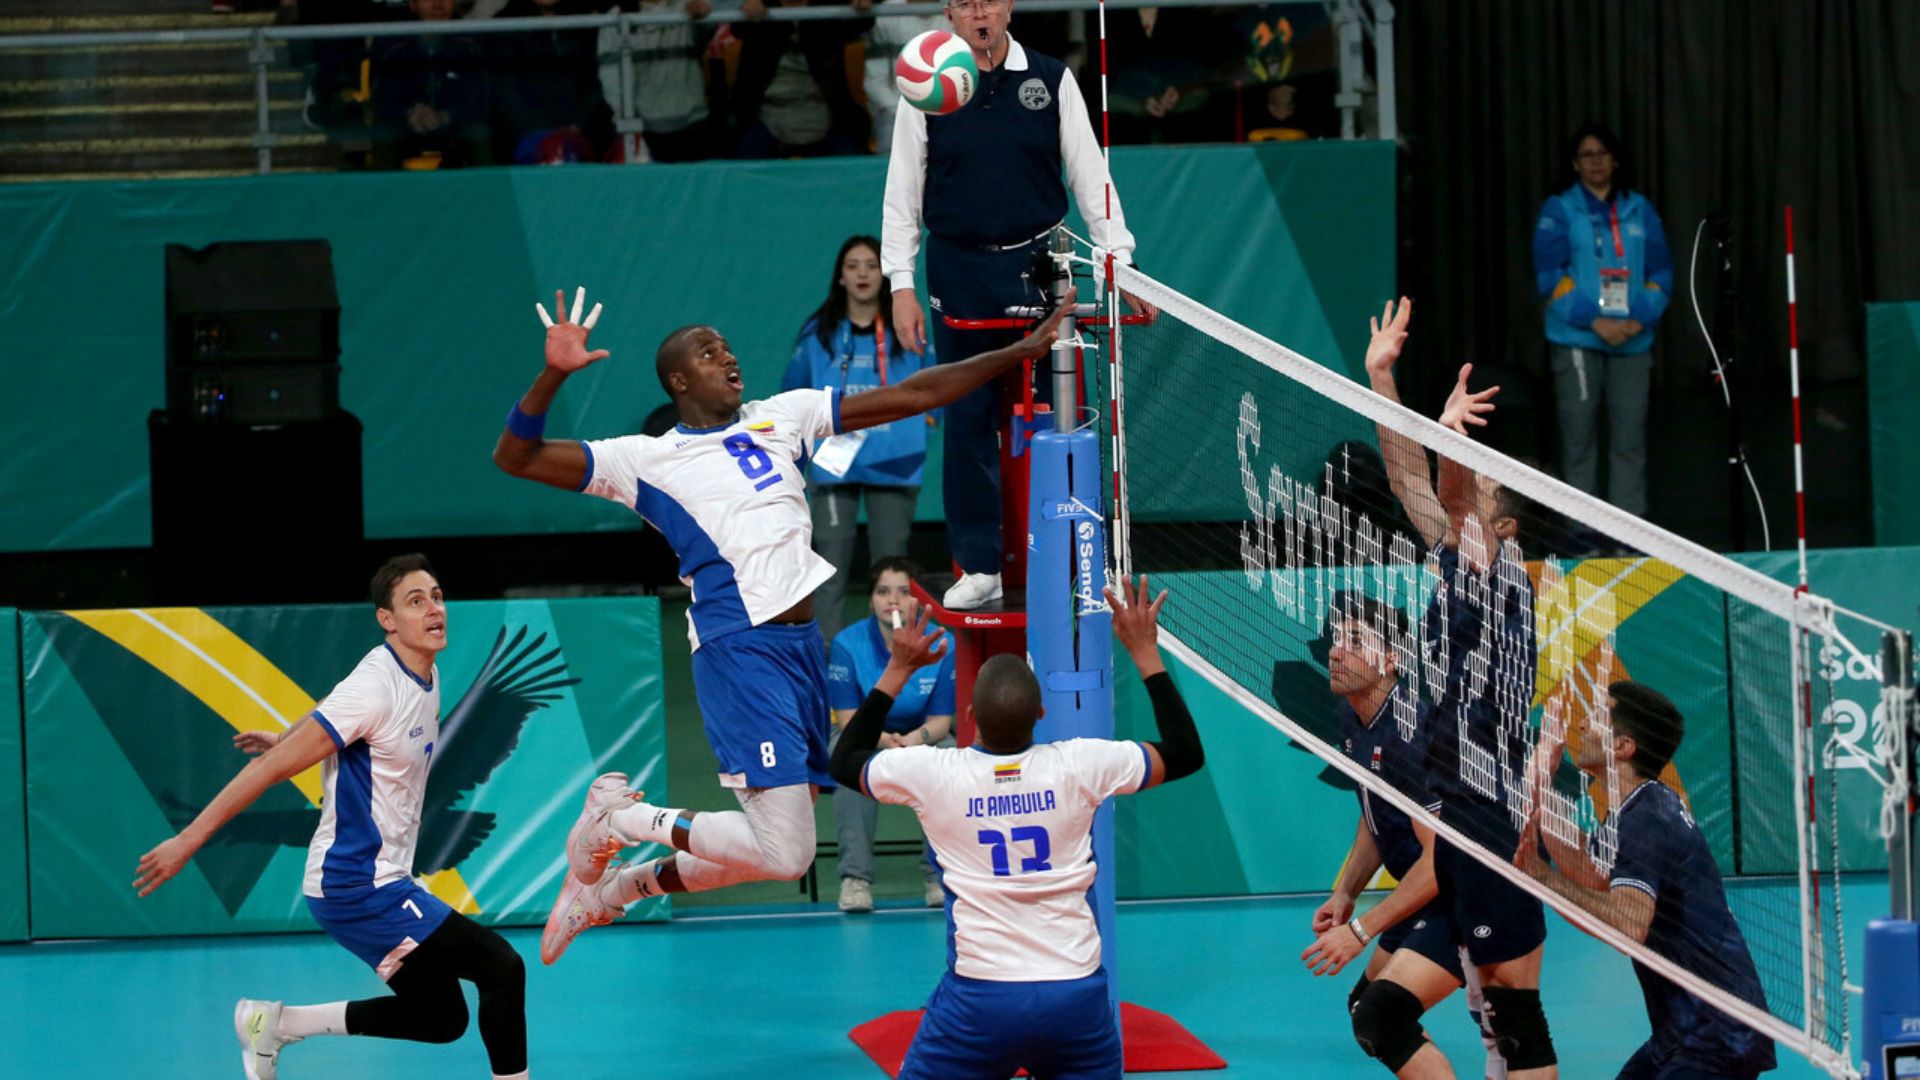 Male's Volleyball: Colombia advances to semifinals